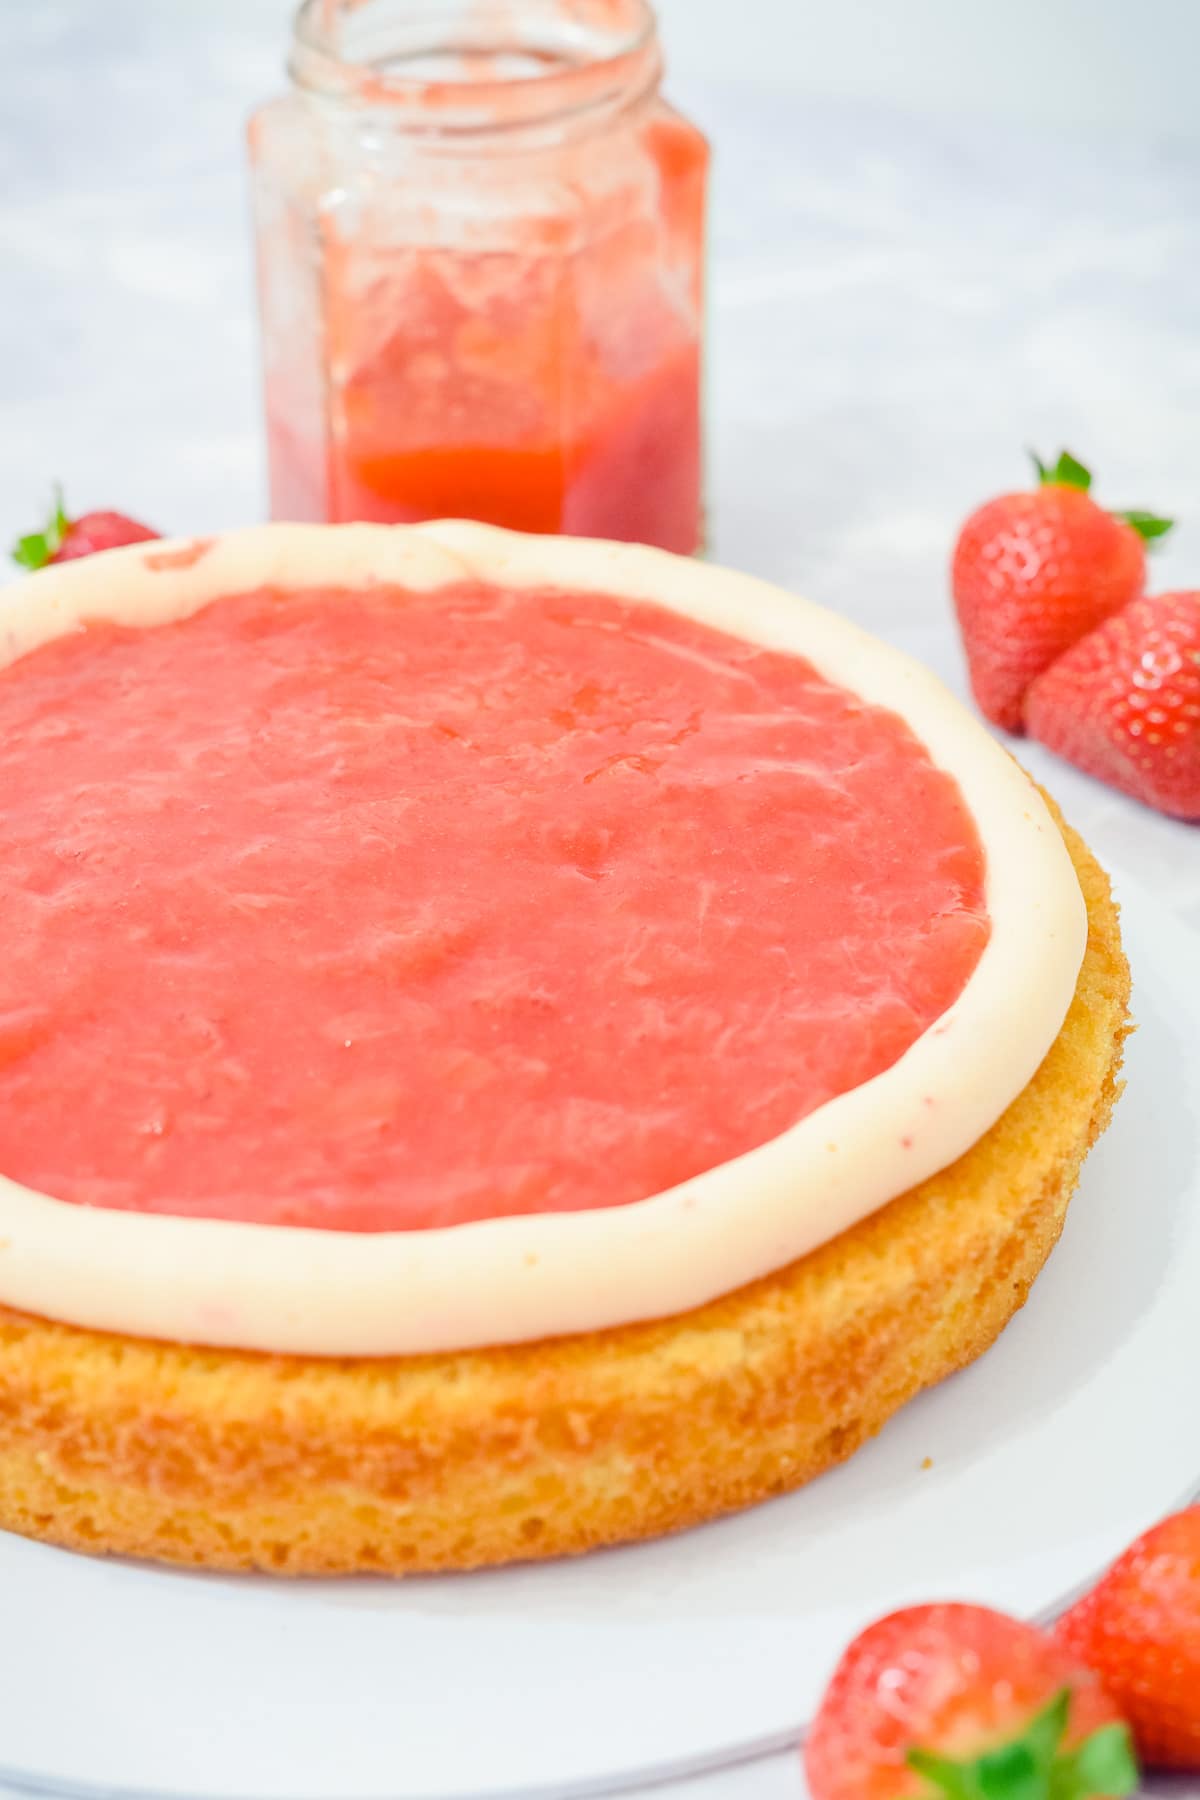 strawberry cake filling sauce spread onto a cake layer inside a ring of frosting